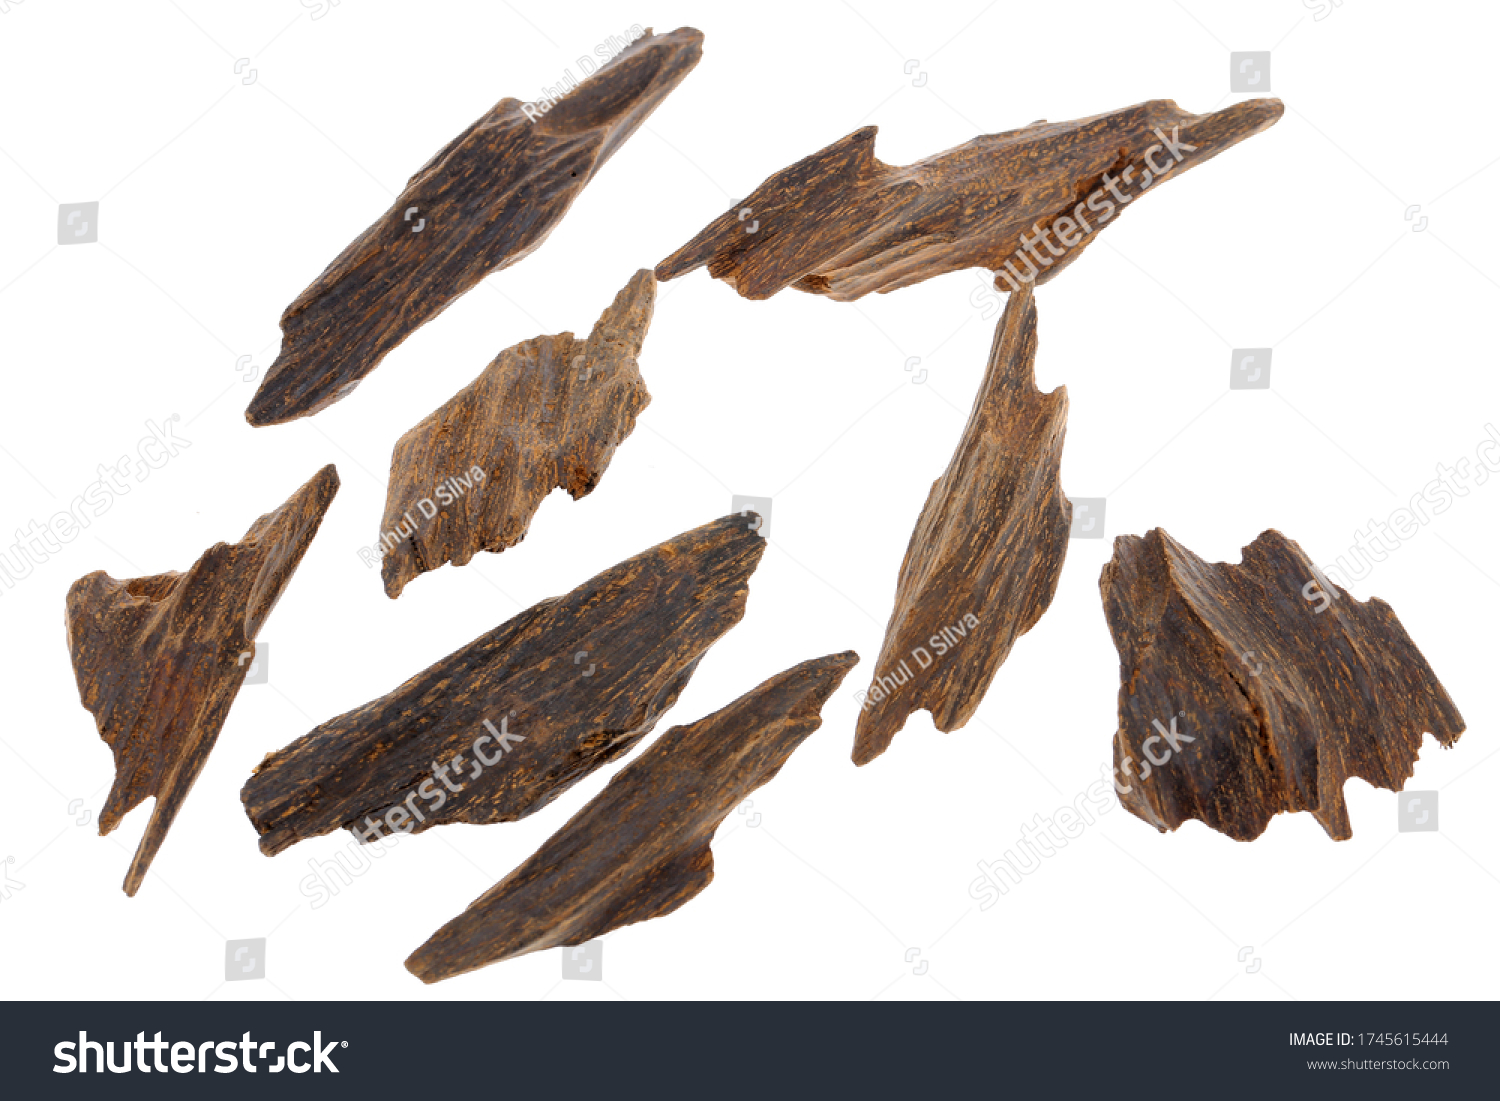 Selective Focus, Sticks Of Agar Wood Or Agarwood Background The Incense Chips Used By Burning for incense & perfumes of essential oil as Oud Or Bakhoor #1745615444